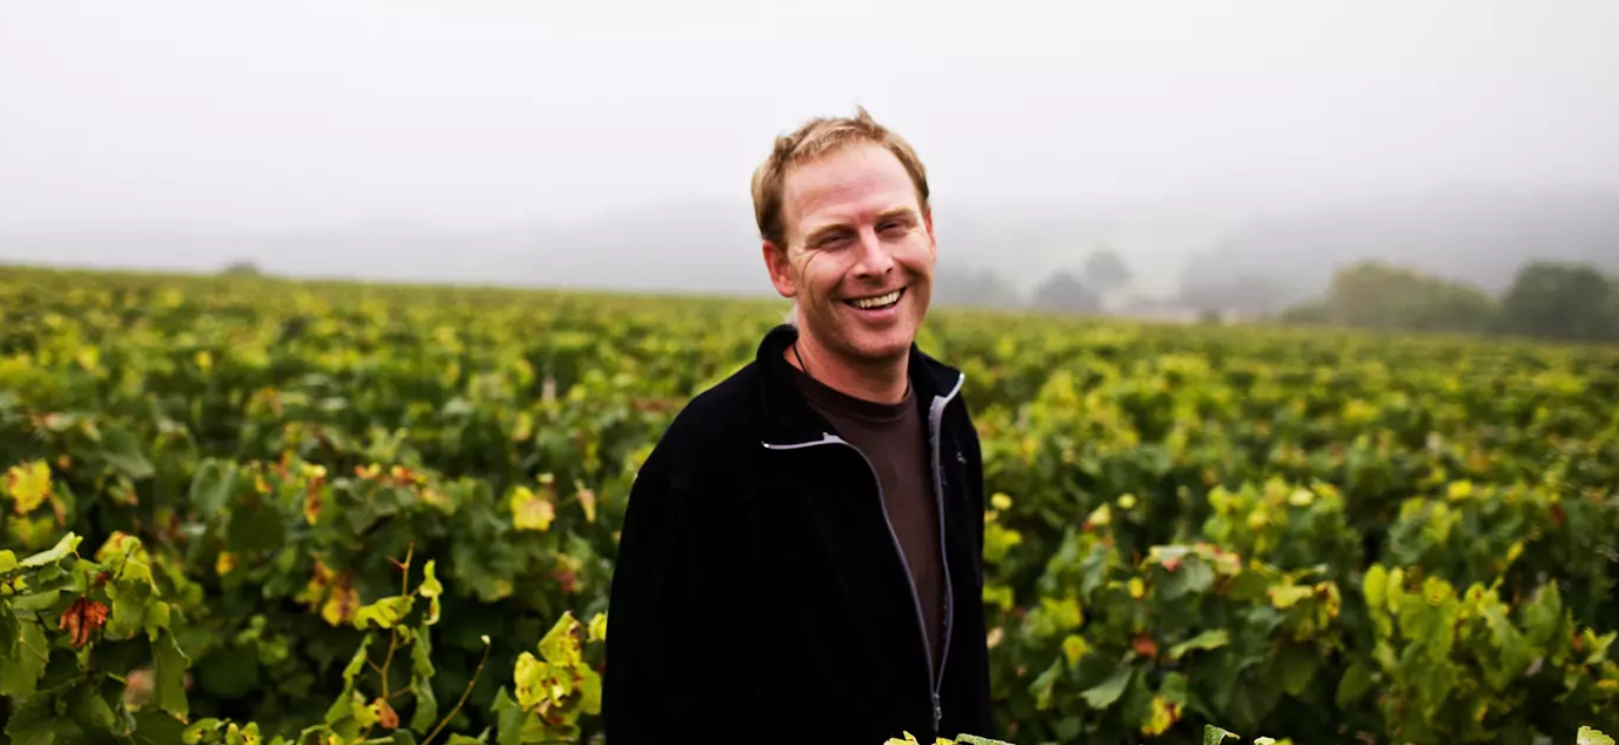 A Virtual Evening with Chablis Producer Patrick Piuze